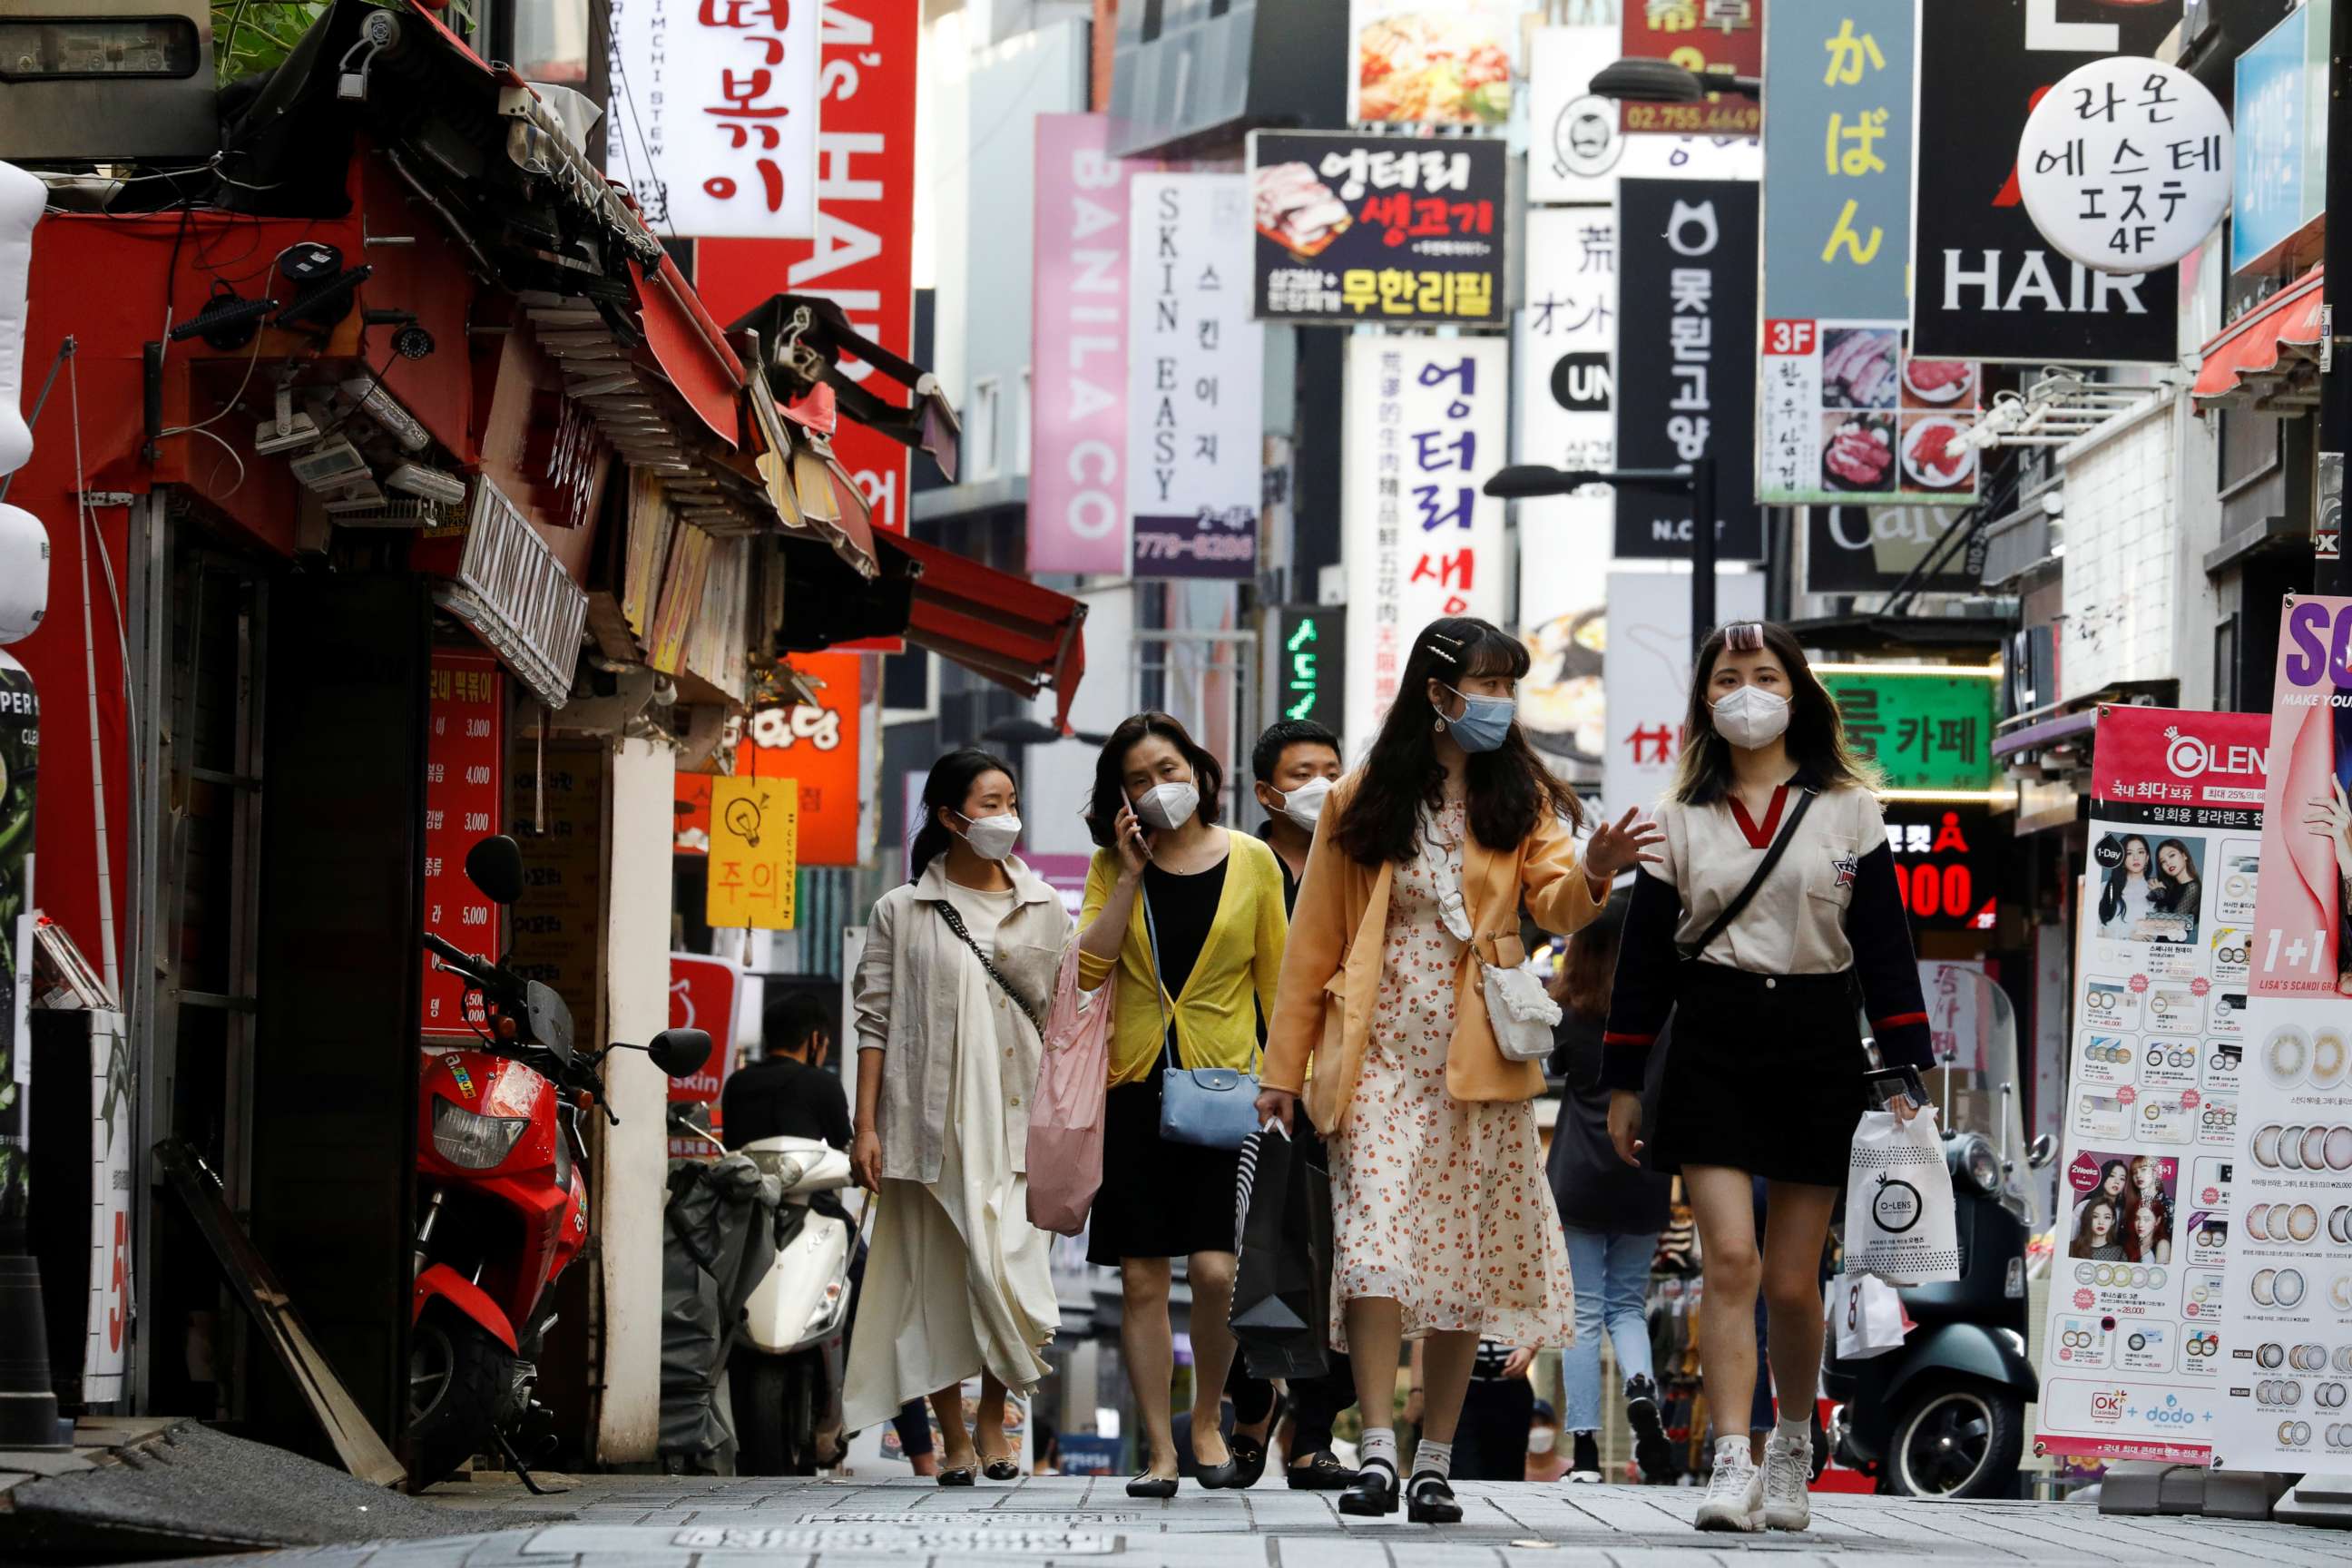 PHOTO: People wearing masks walk at Myeongdong shopping district amid social distancing measures to avoid the spread of the coronavirus disease (COVID-19), in Seoul, South Korea, May 28, 2020.